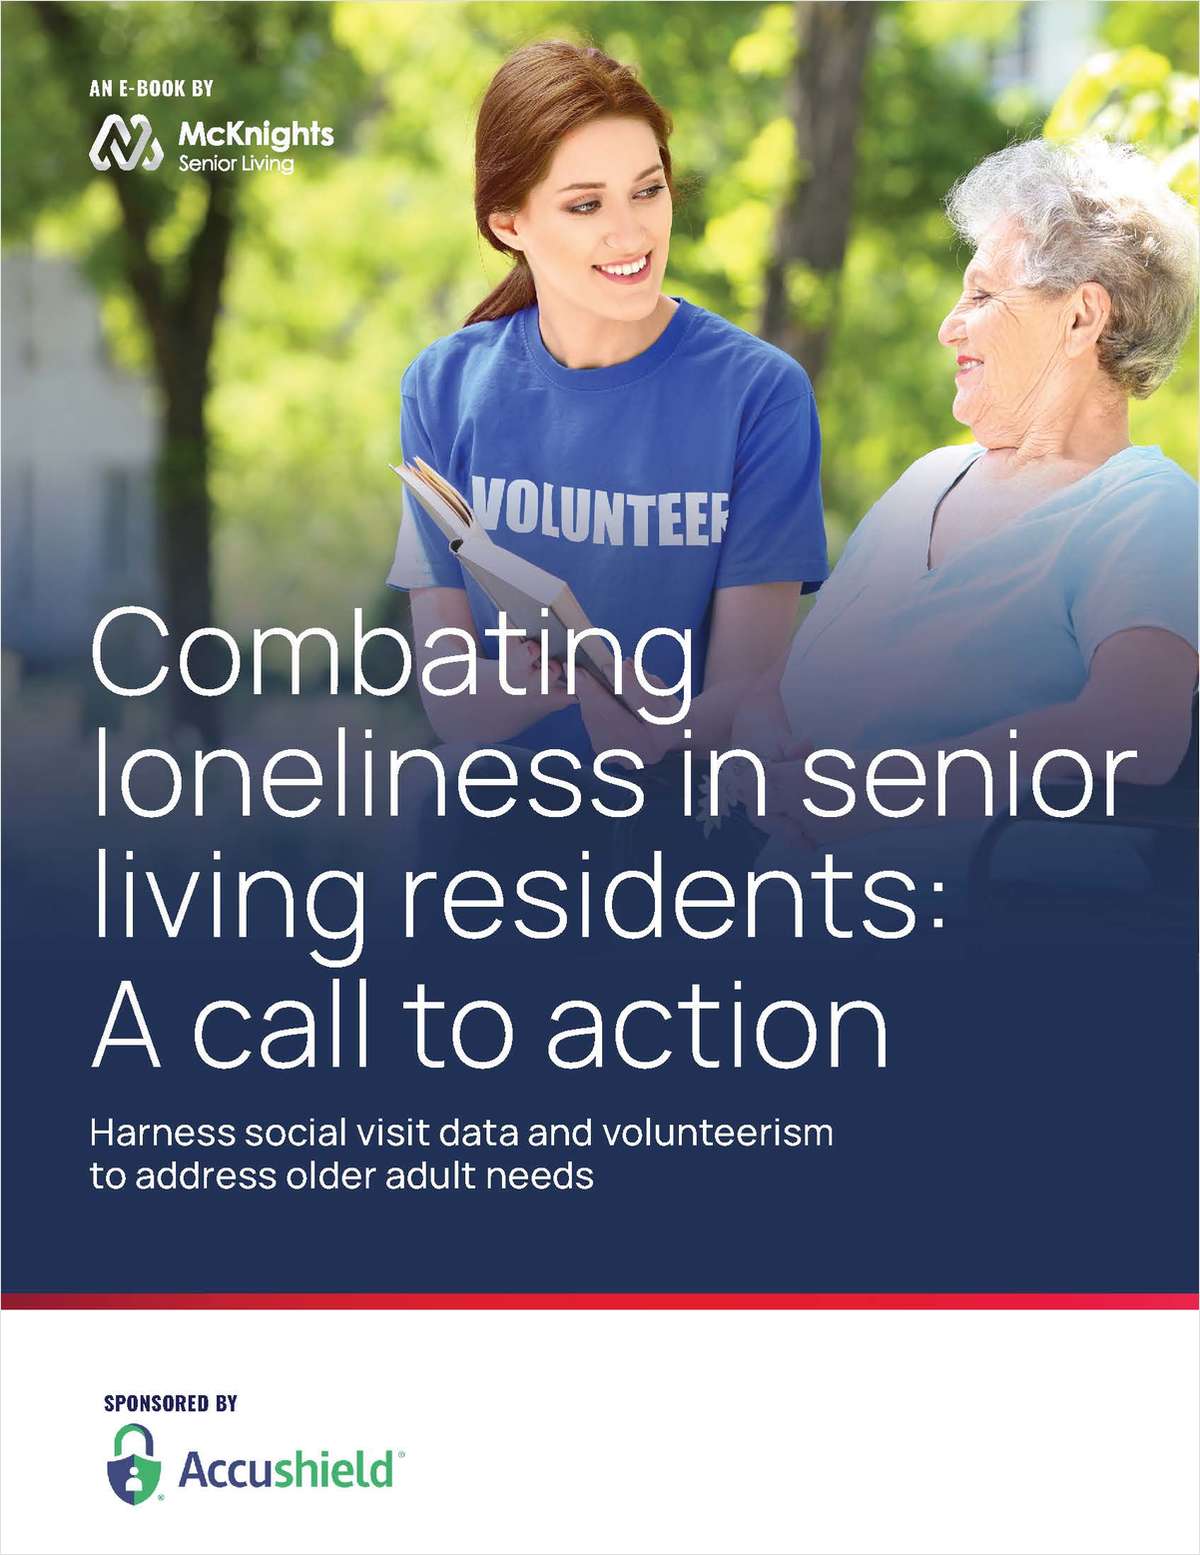 Combating loneliness in senior living residents: A call to action